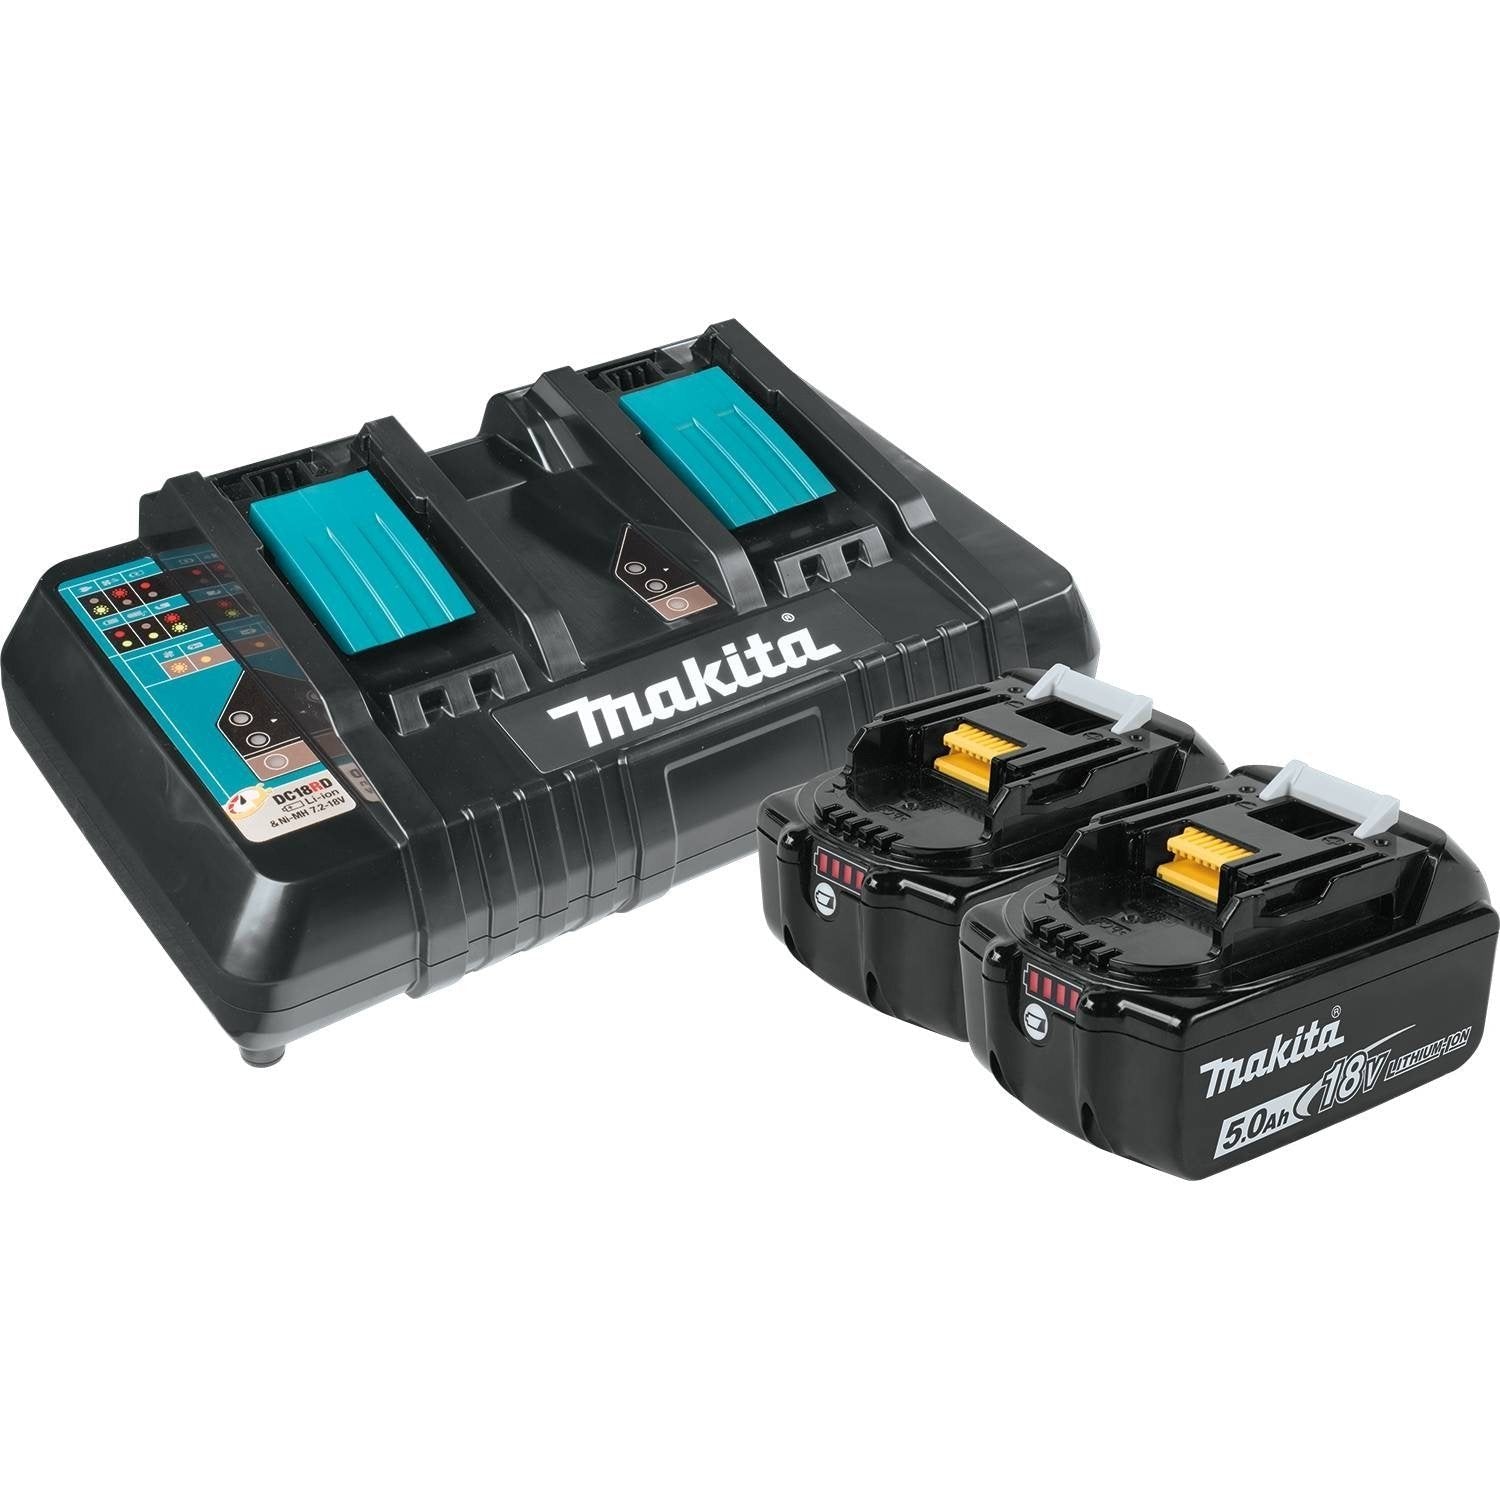 Makita Y-00359 - 18V Dual Port Charger with 2 5.0Ah Battery